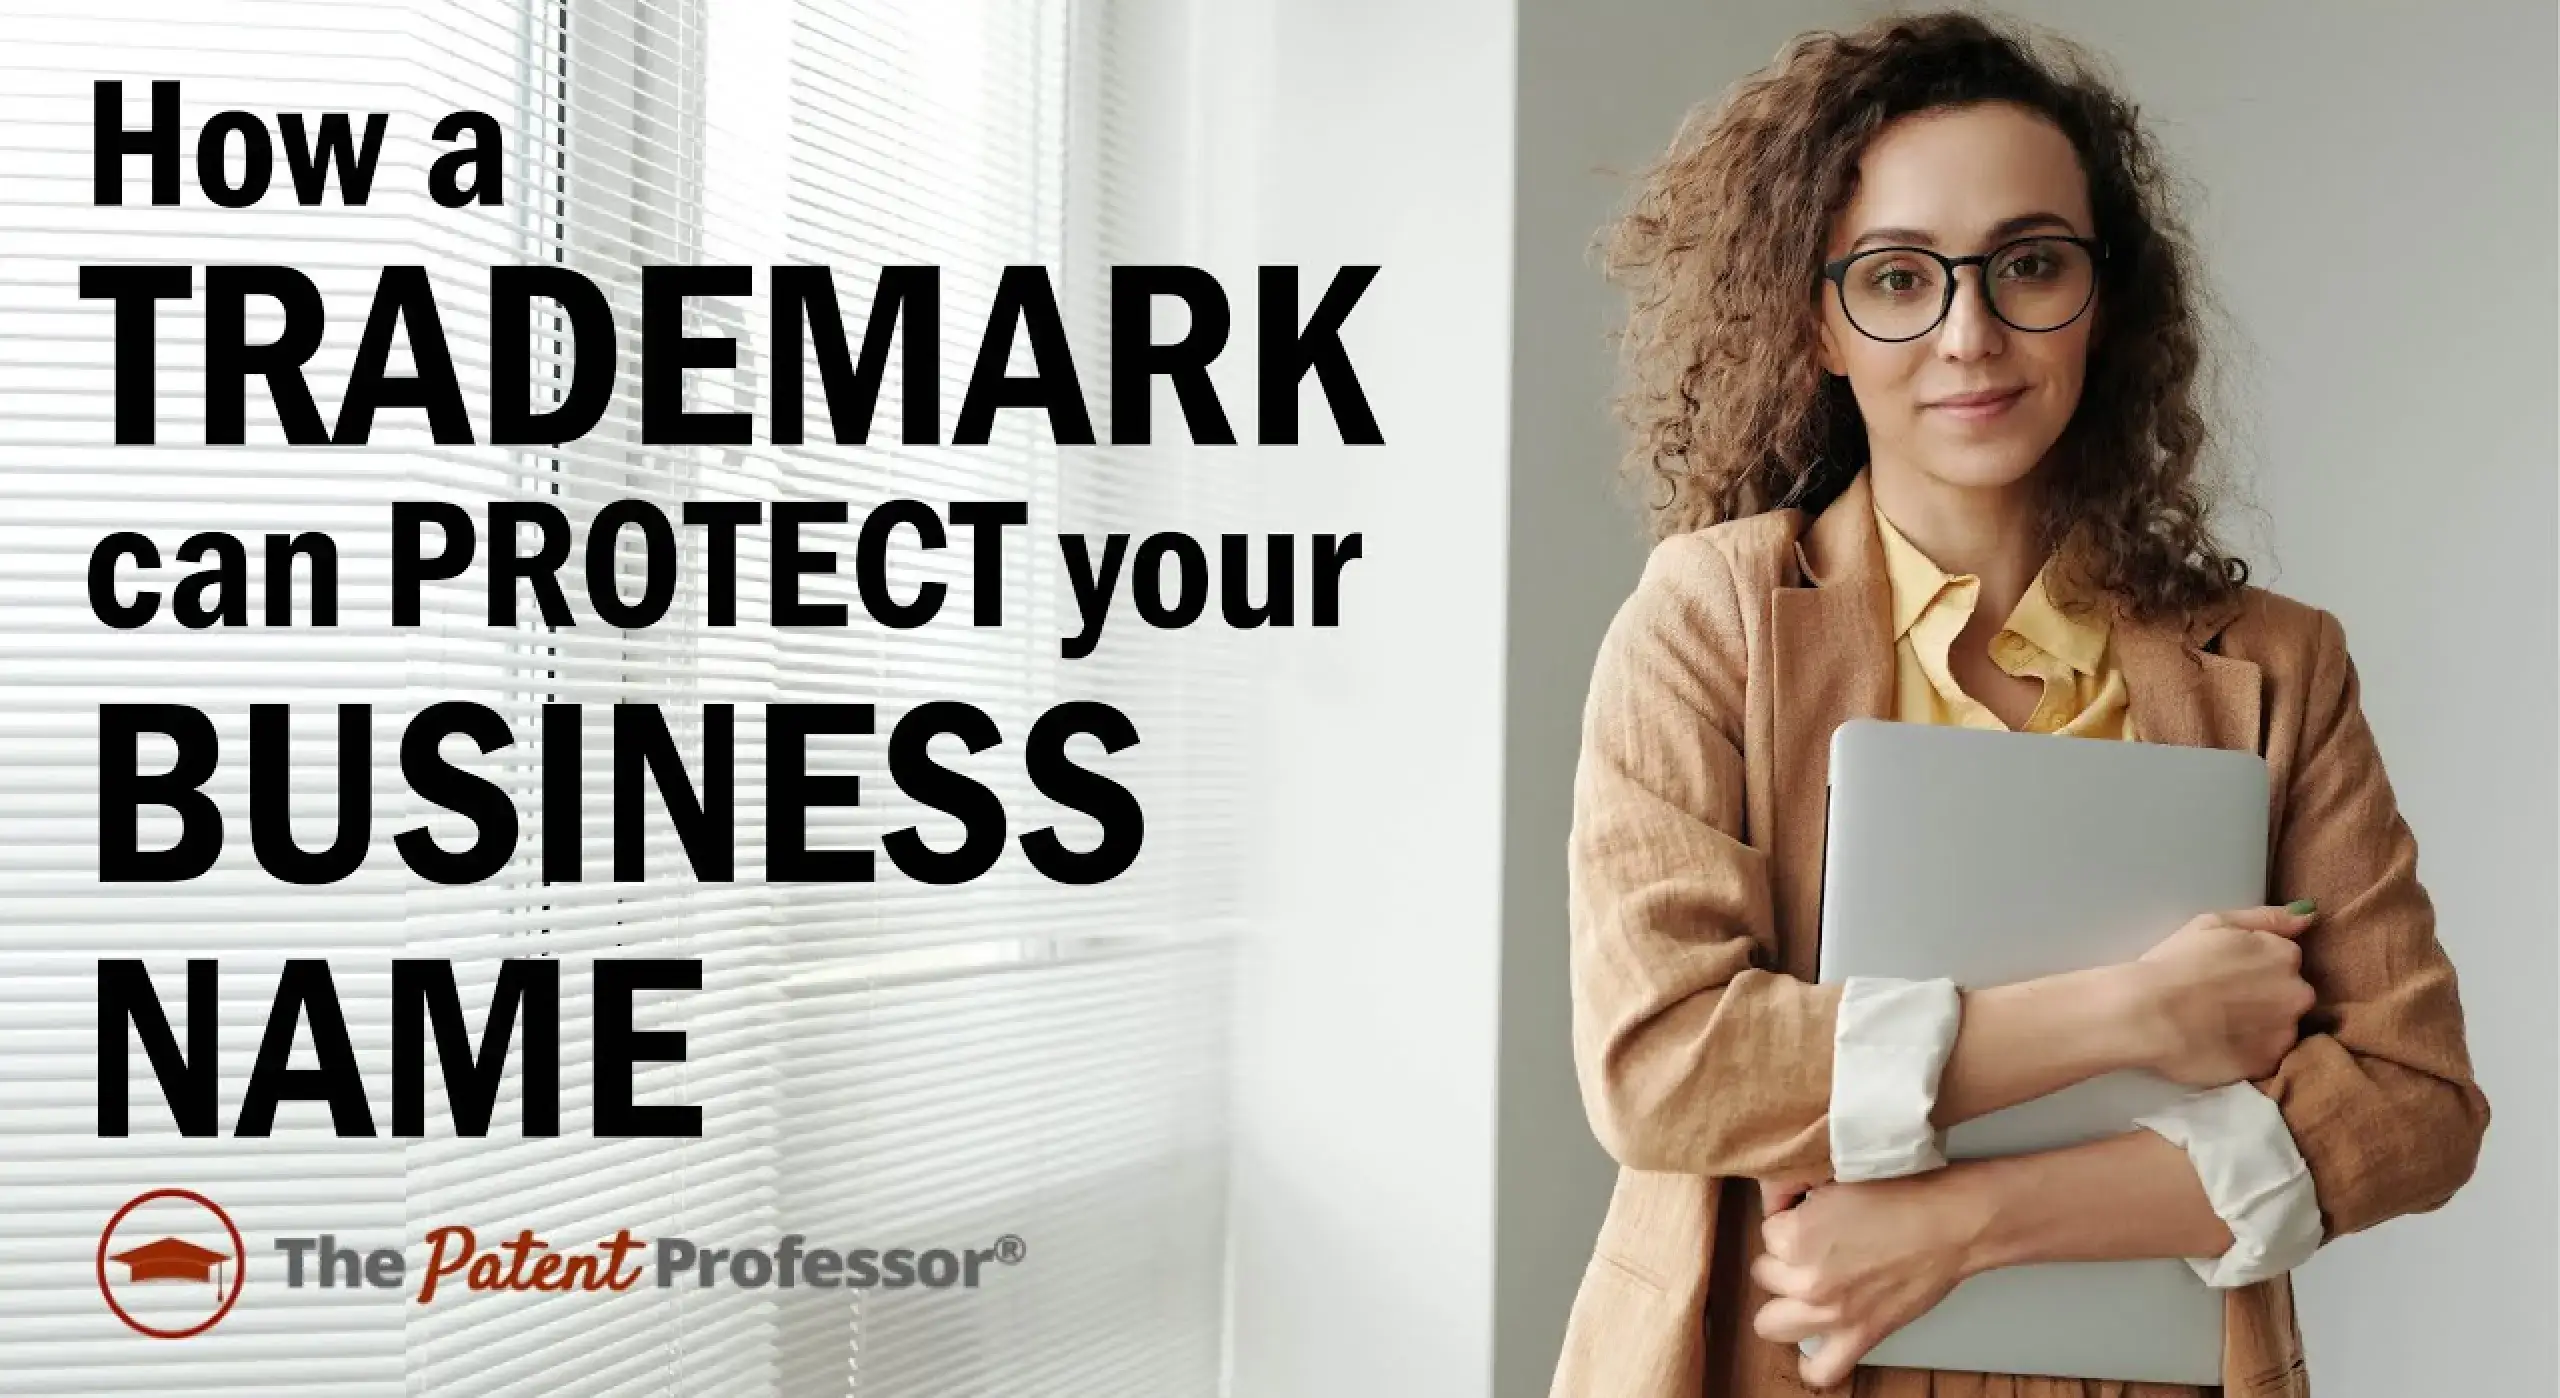 If I Trademark My Business Name, is it Protected from Being Used Across the United States?